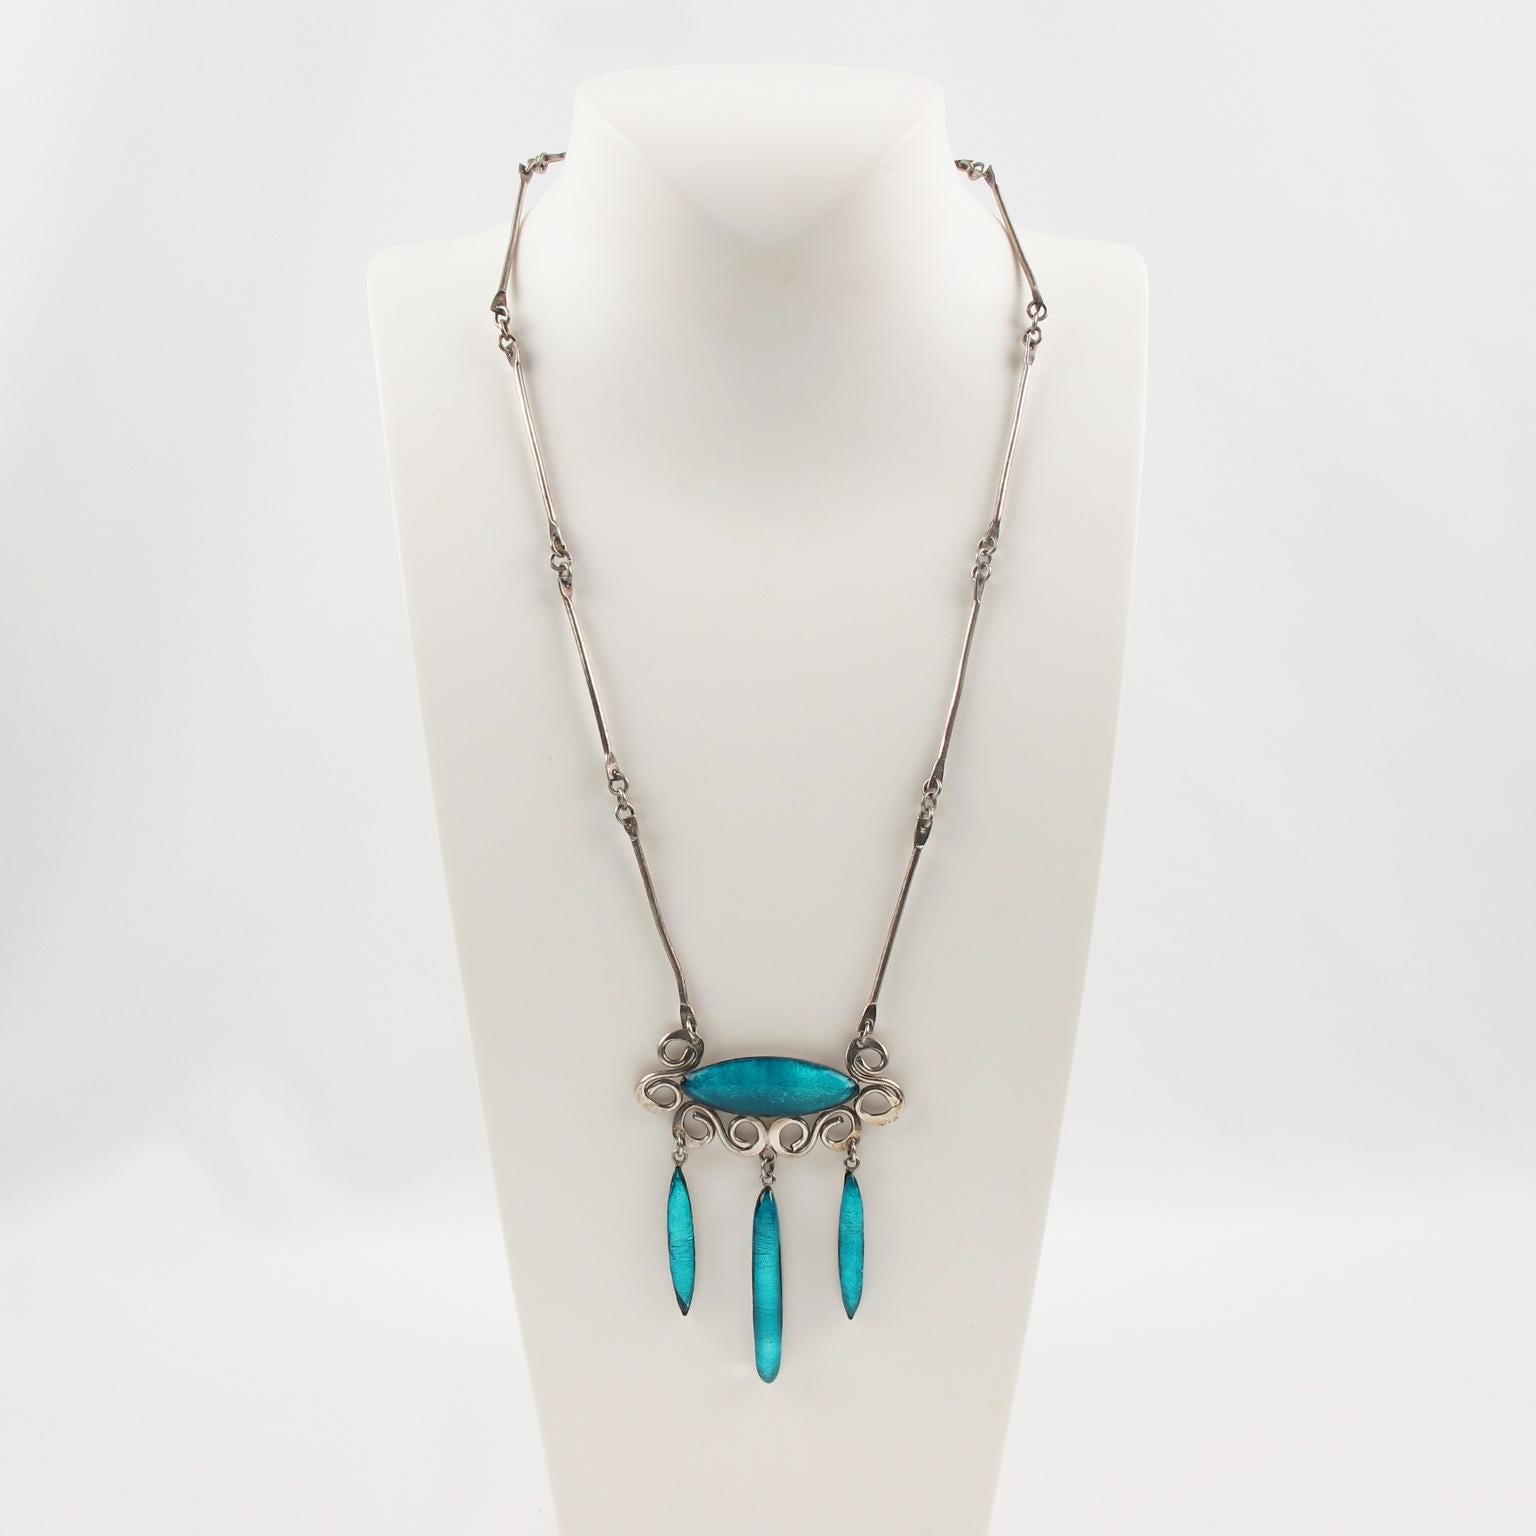 Modernist Mid-Century Silvered Metal Necklace with Electric Blue Poured Glass Pendant For Sale